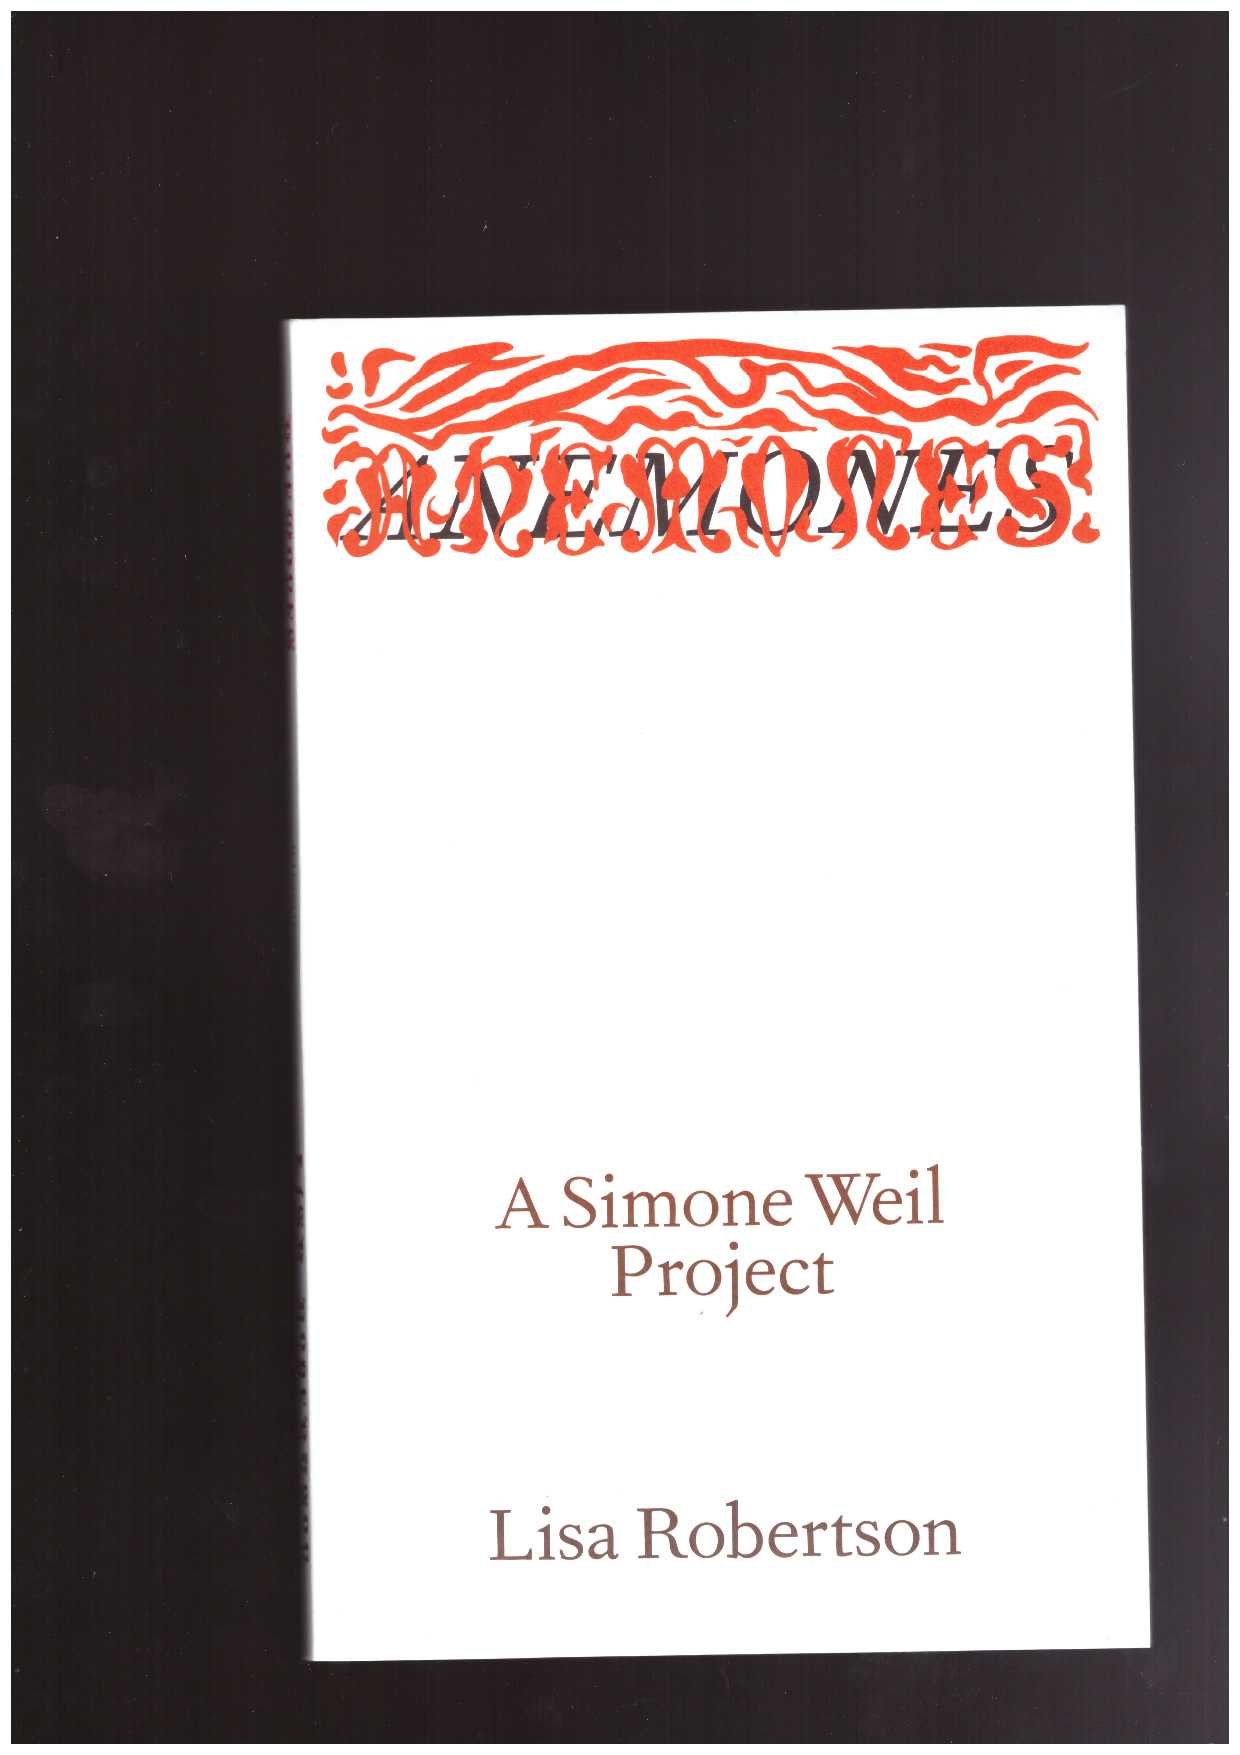 ROBERTSON, Lisa - Anemones: A Simone Weil Project